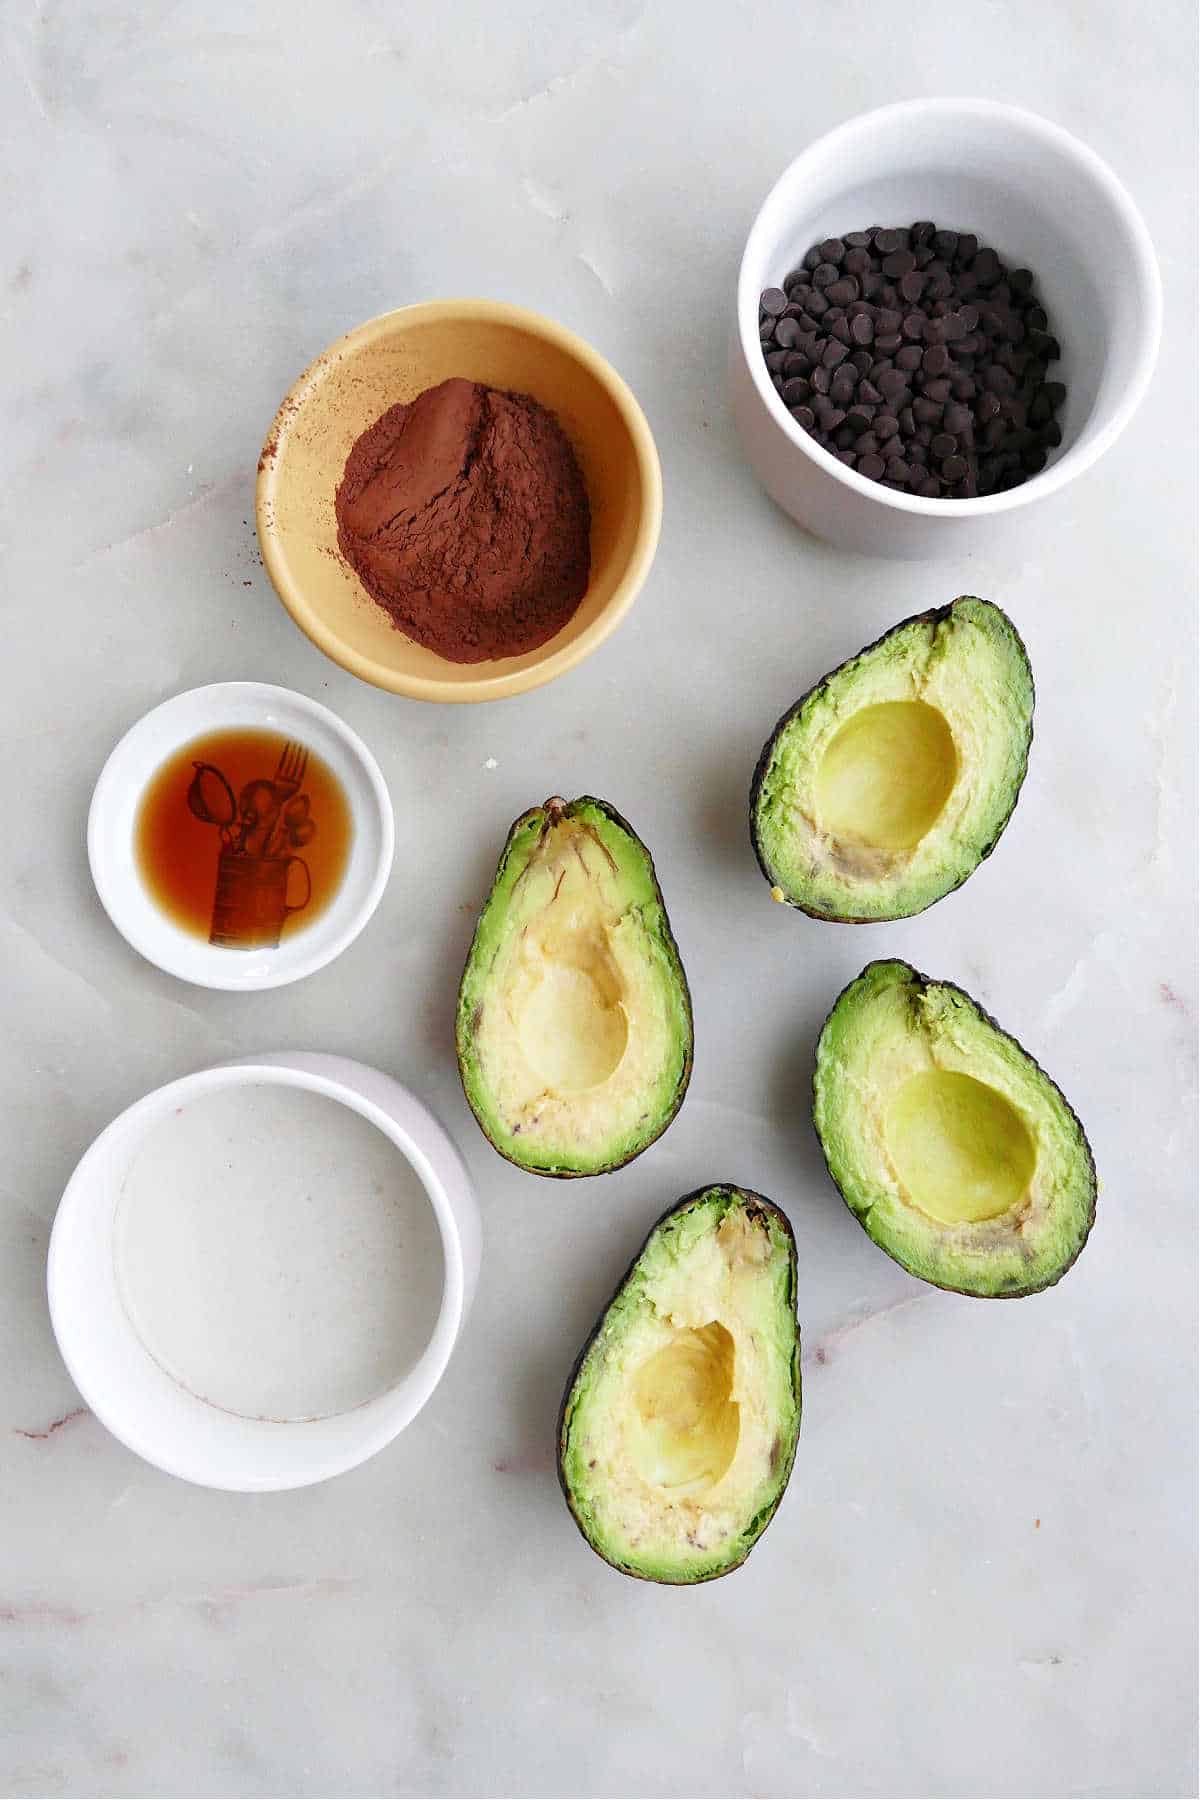 almond milk and maple syrup, cocoa powder, chocolate chips, vanilla, and avocados on a counter